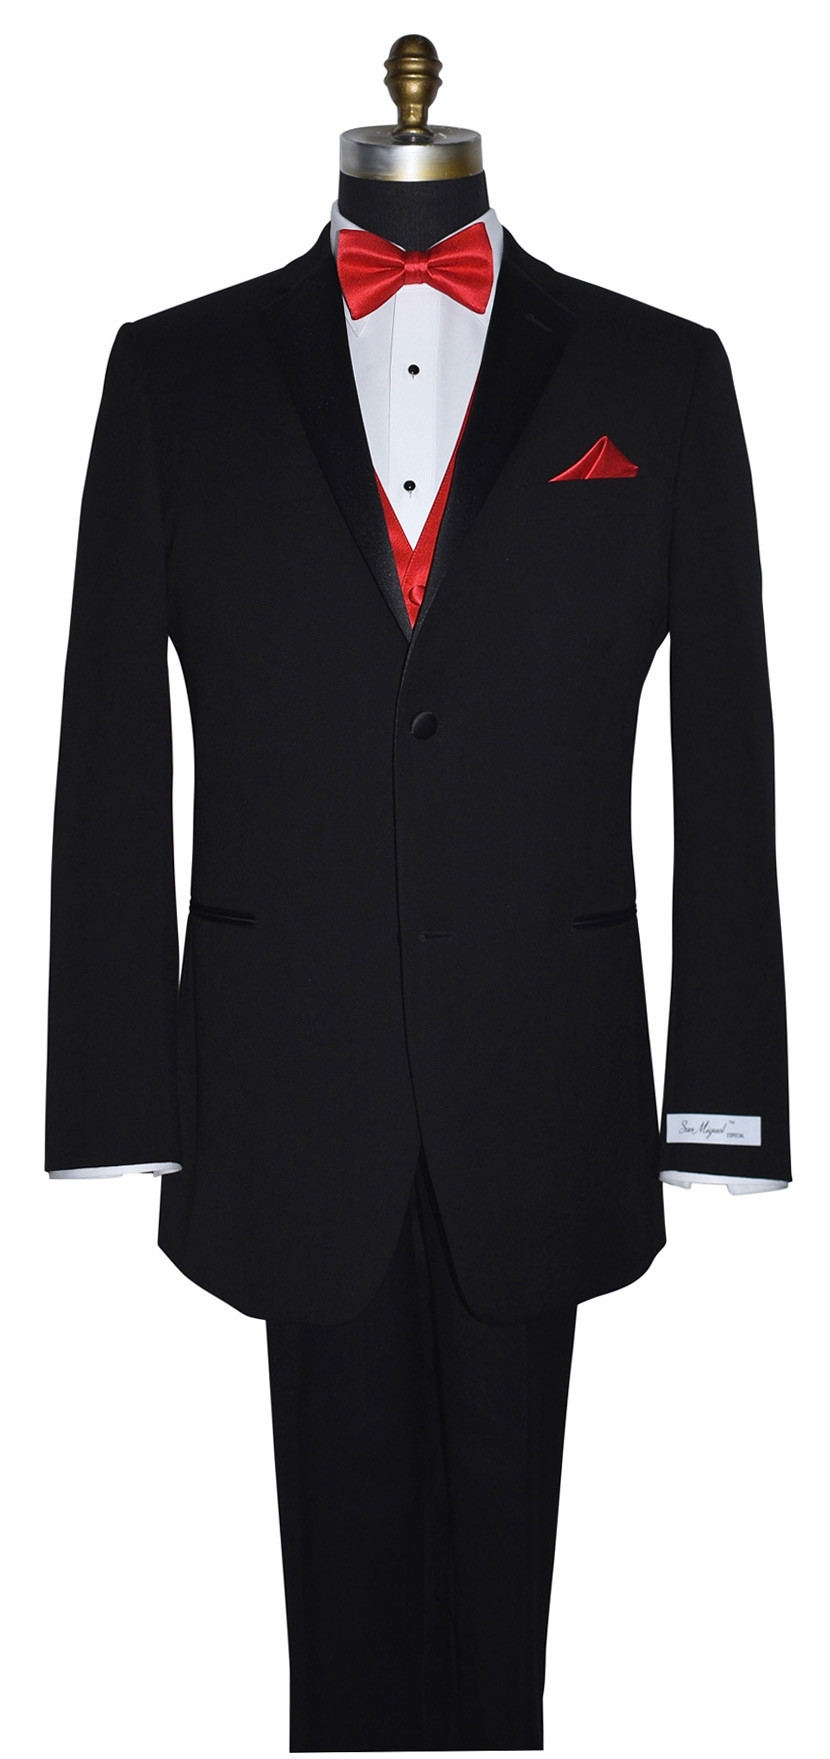 ruby red tuxedo vest with ruby red pre-tied bowtie